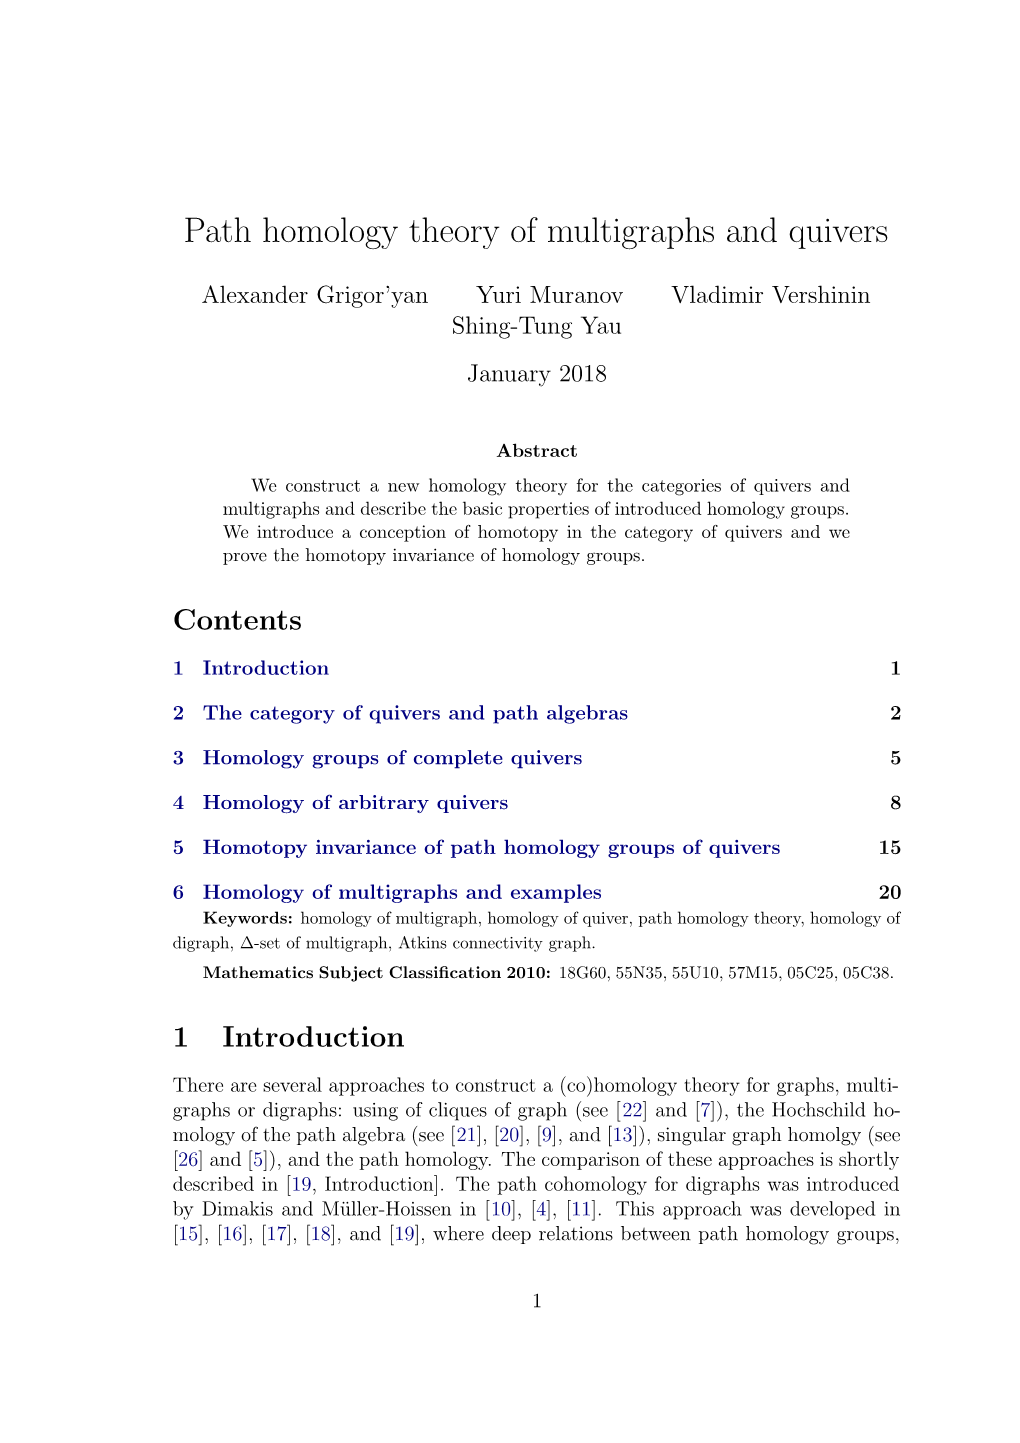 Path Homology Theory of Multigraphs and Quivers